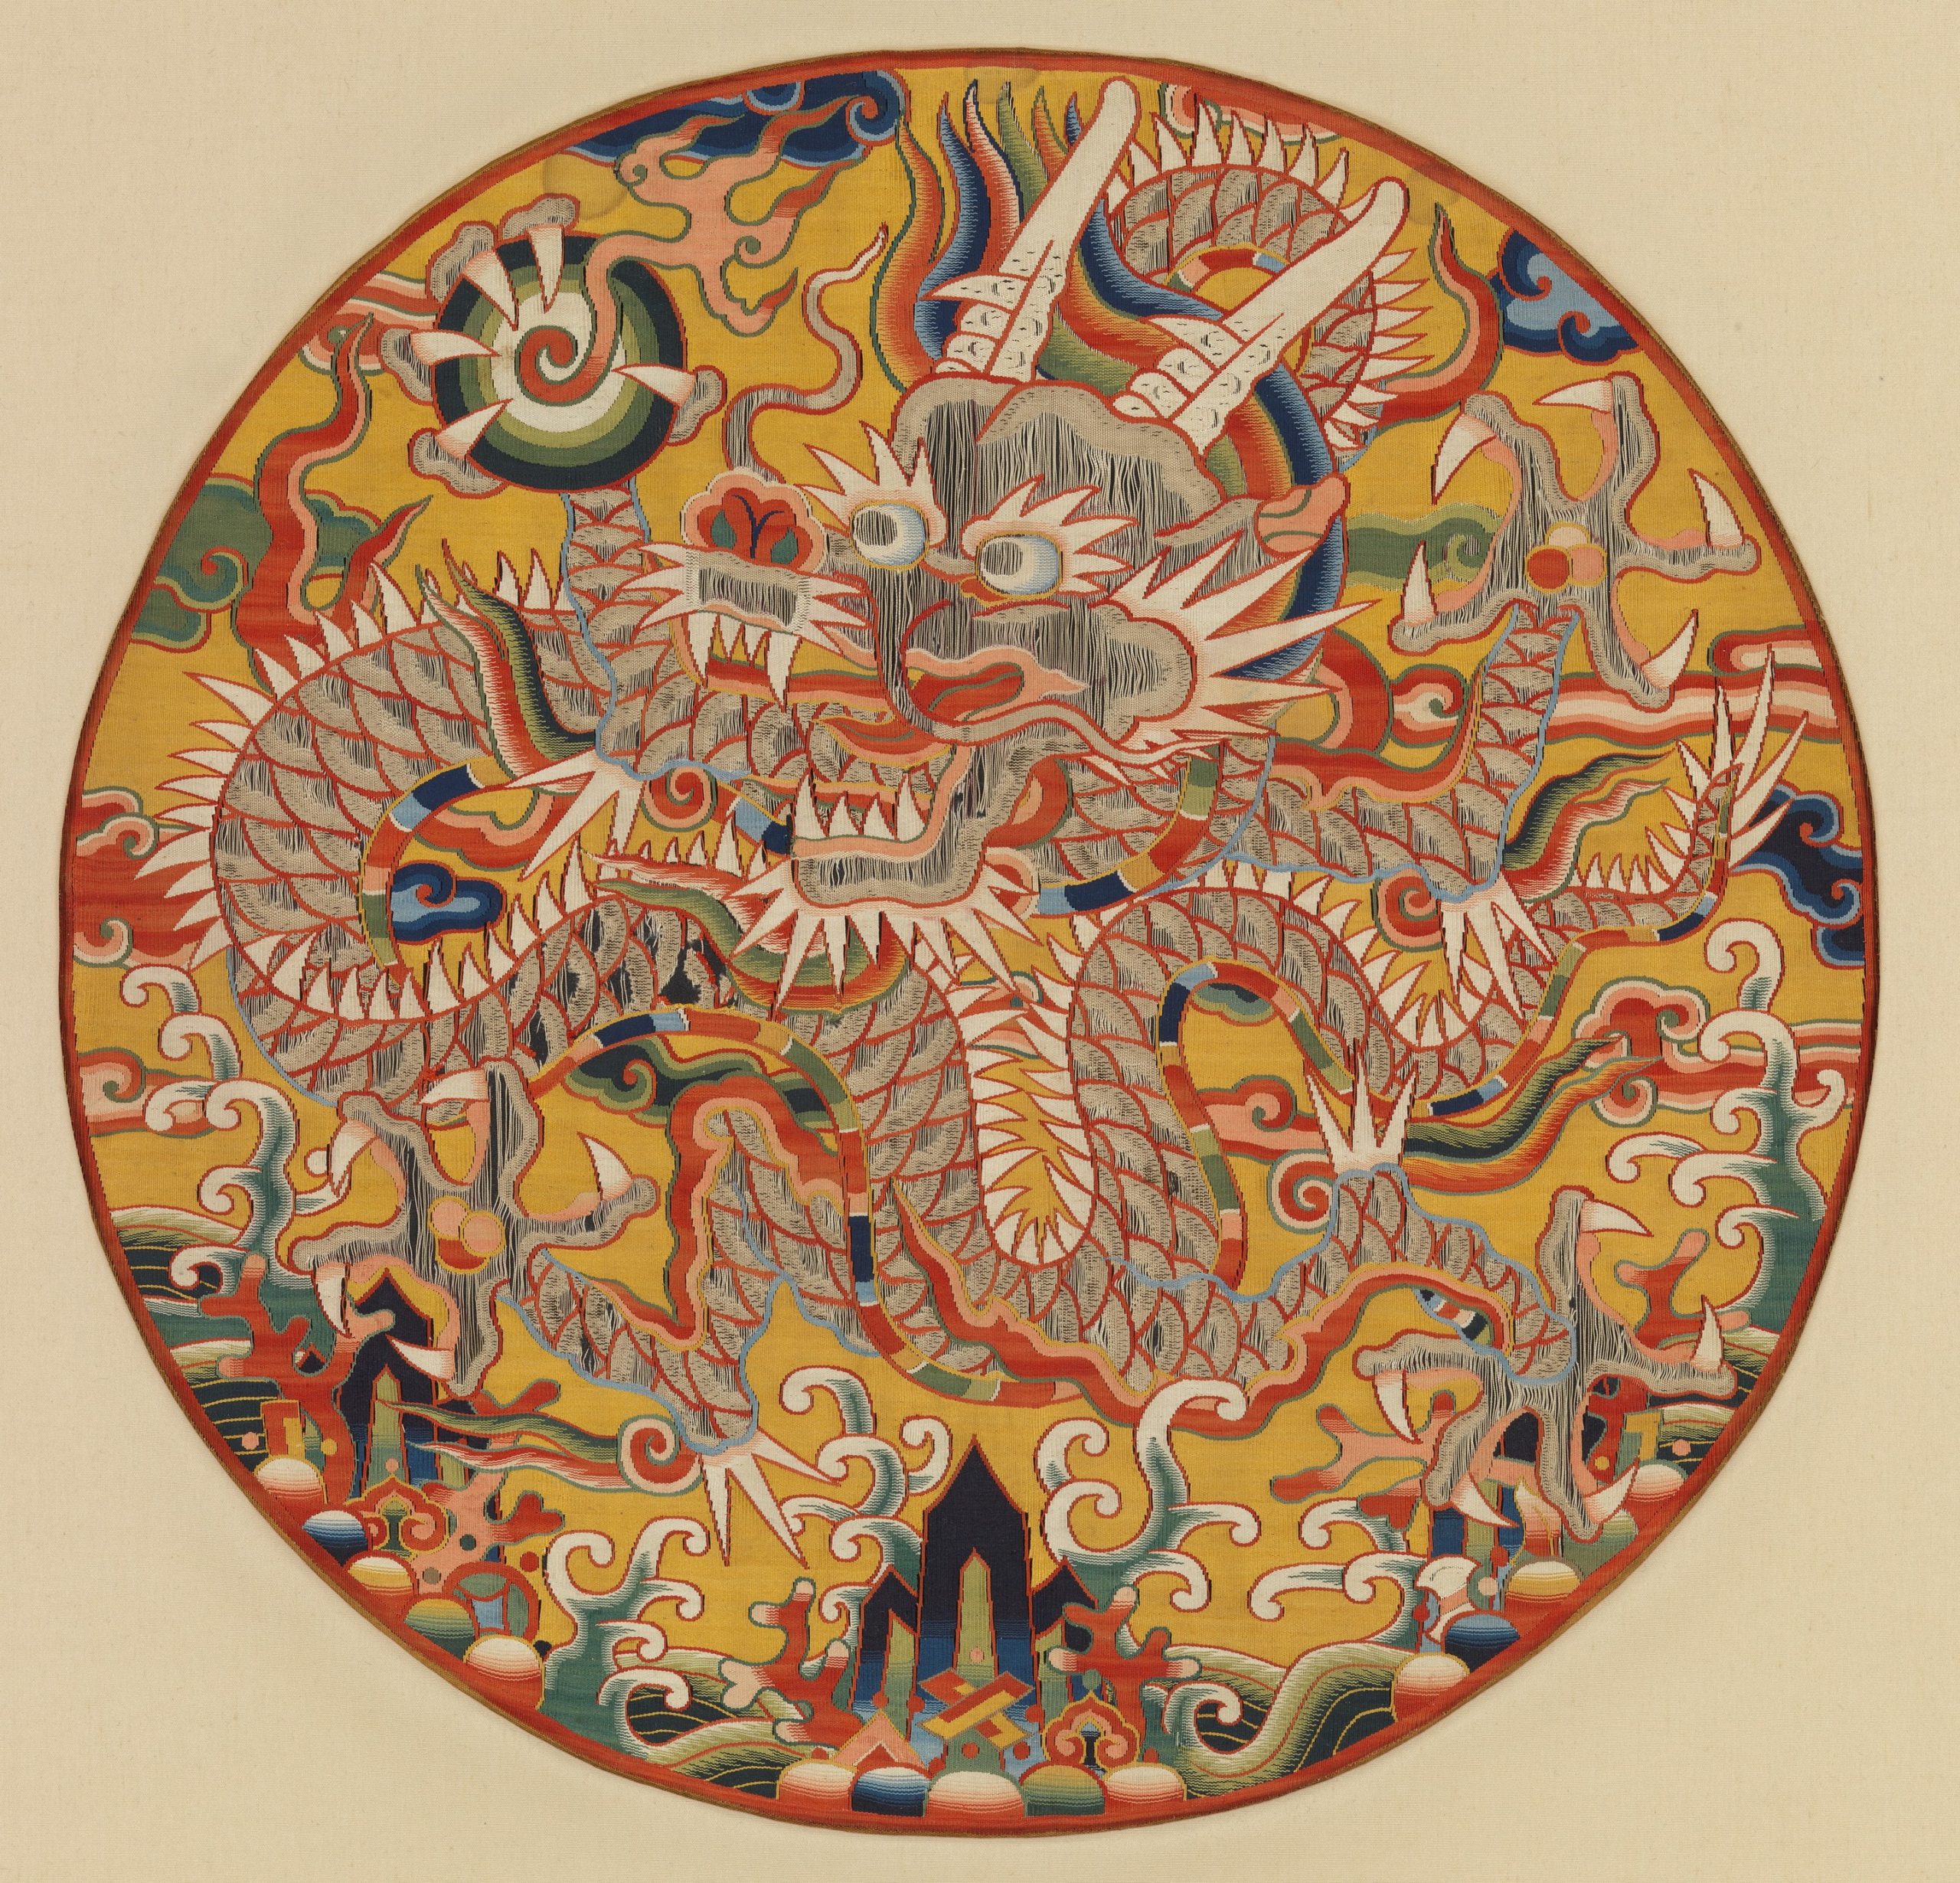 A dragon is surrounded by a variety of shapes and patterns inside of a circle.